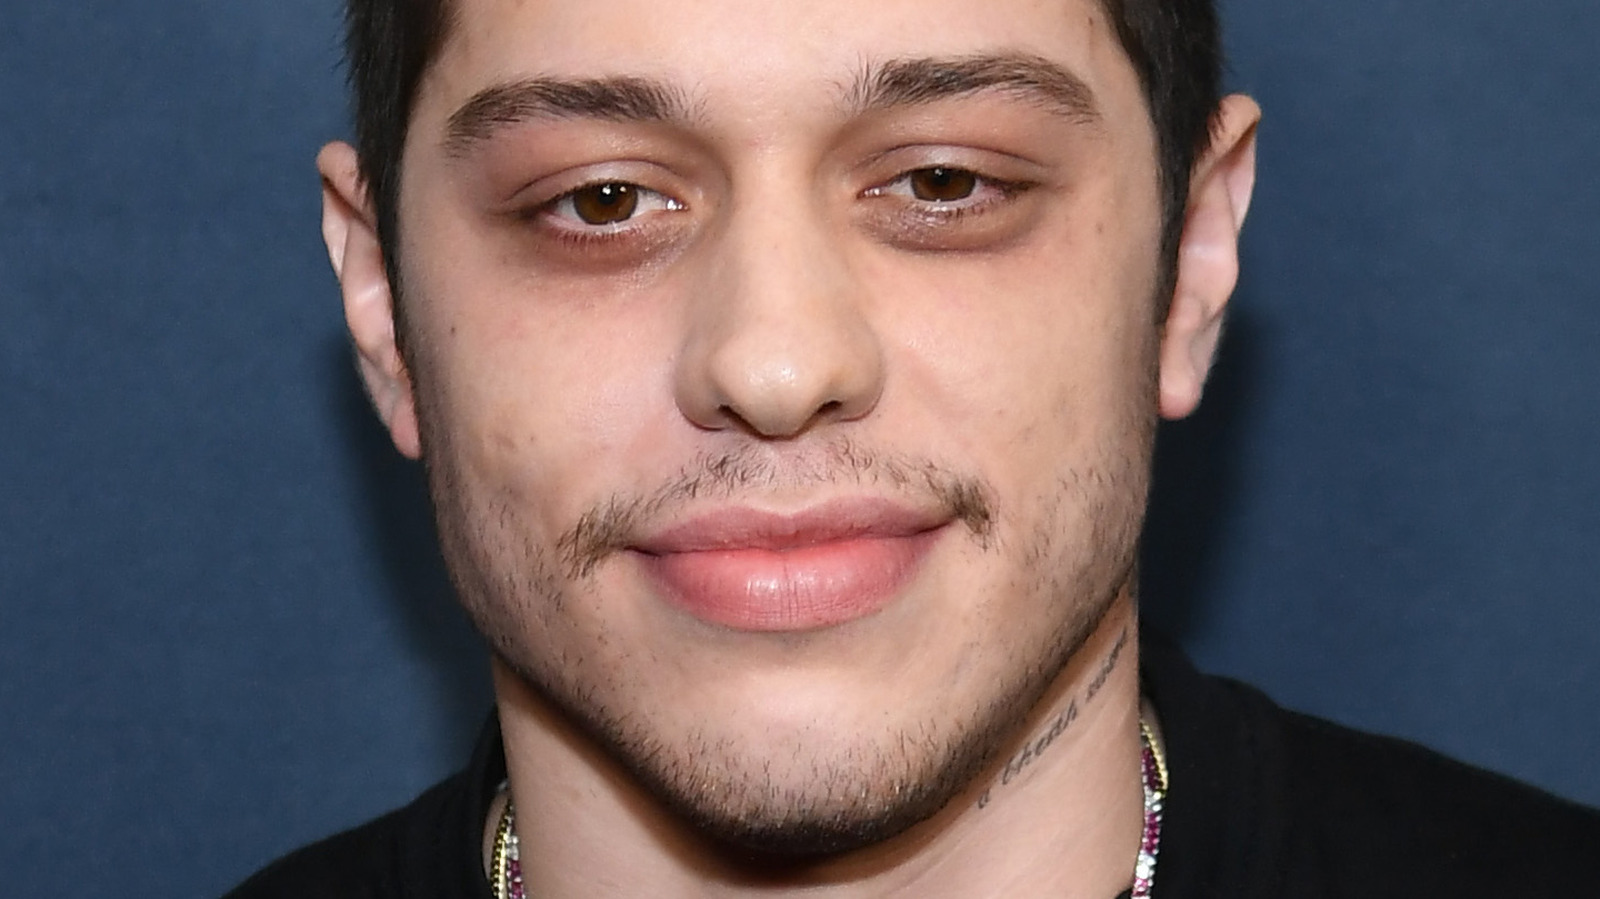 What's Going On With Pete Davidson's Instagram Account?